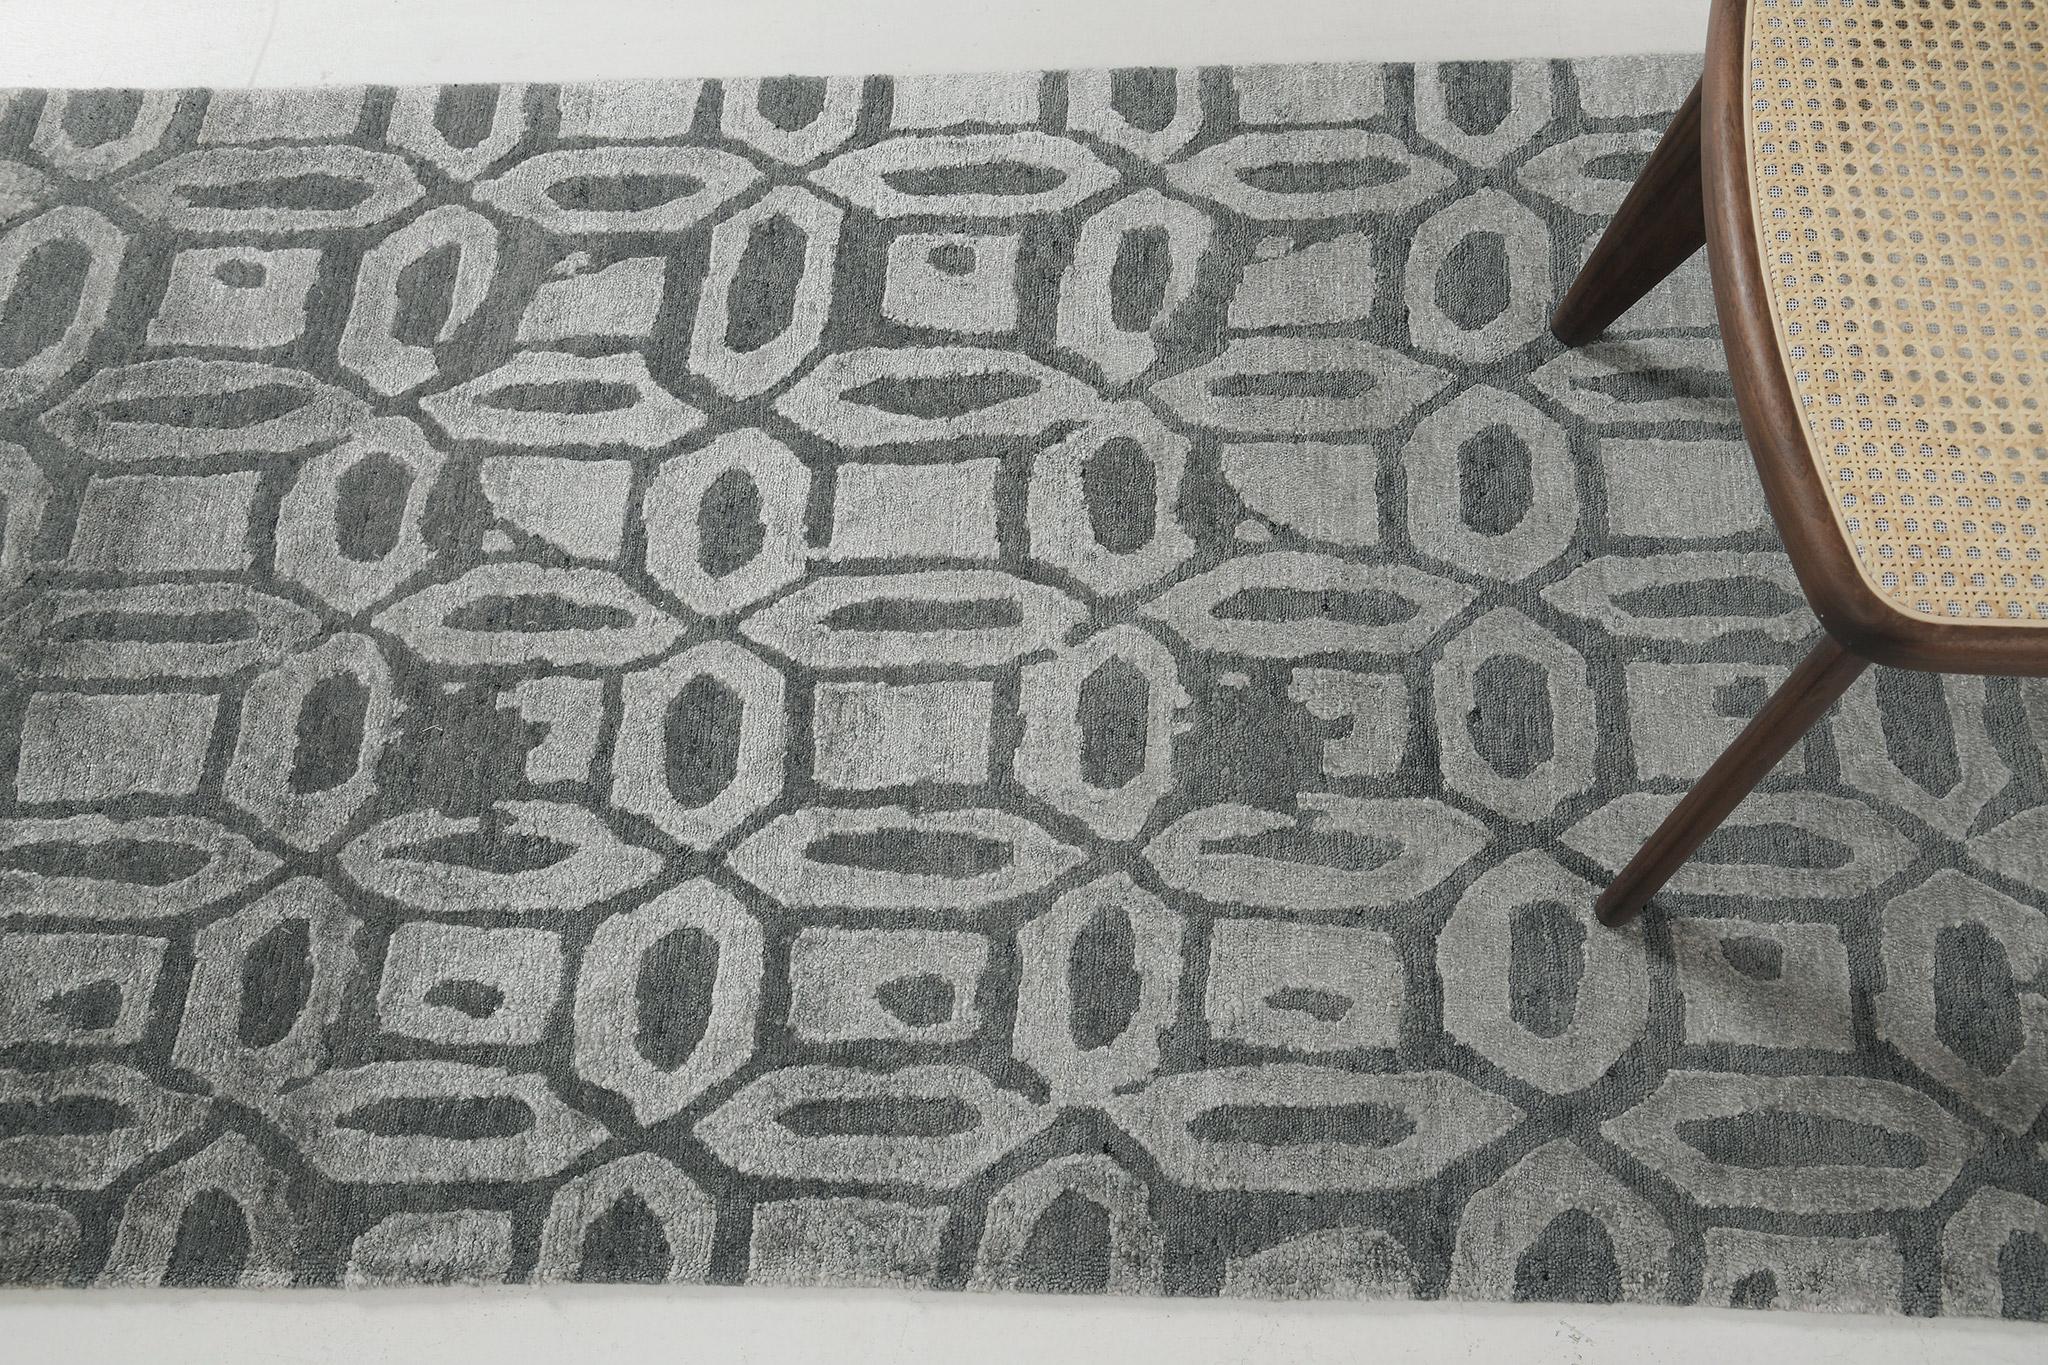 Rallegra is a bamboo silk wool that brings out the best of any room space. It's the grayscale all-over patterned theme that makes an extraordinary piece of art. Adding these to your collection will be a great investment in a modern contemporary